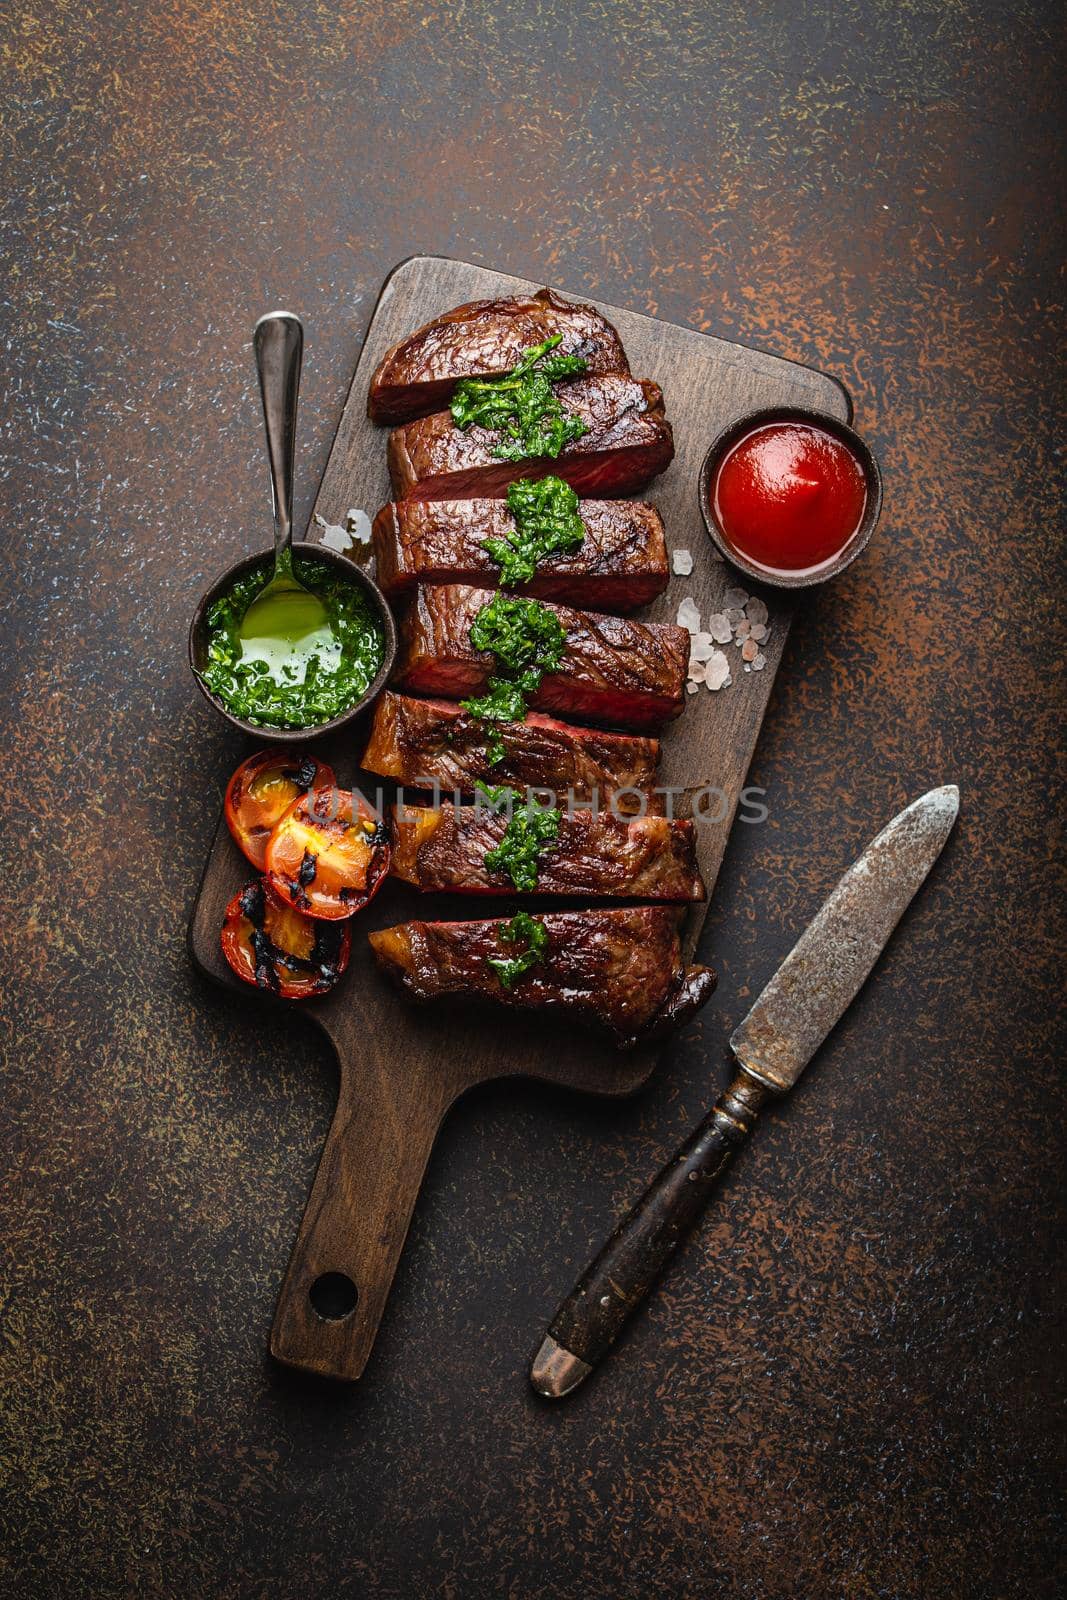 Grilled or fried and sliced marbled meat steak with fork, tomatoes as a side dish and different sauces on wooden cutting board, top view, close-up, stone rustic background. Beef meat steak concept